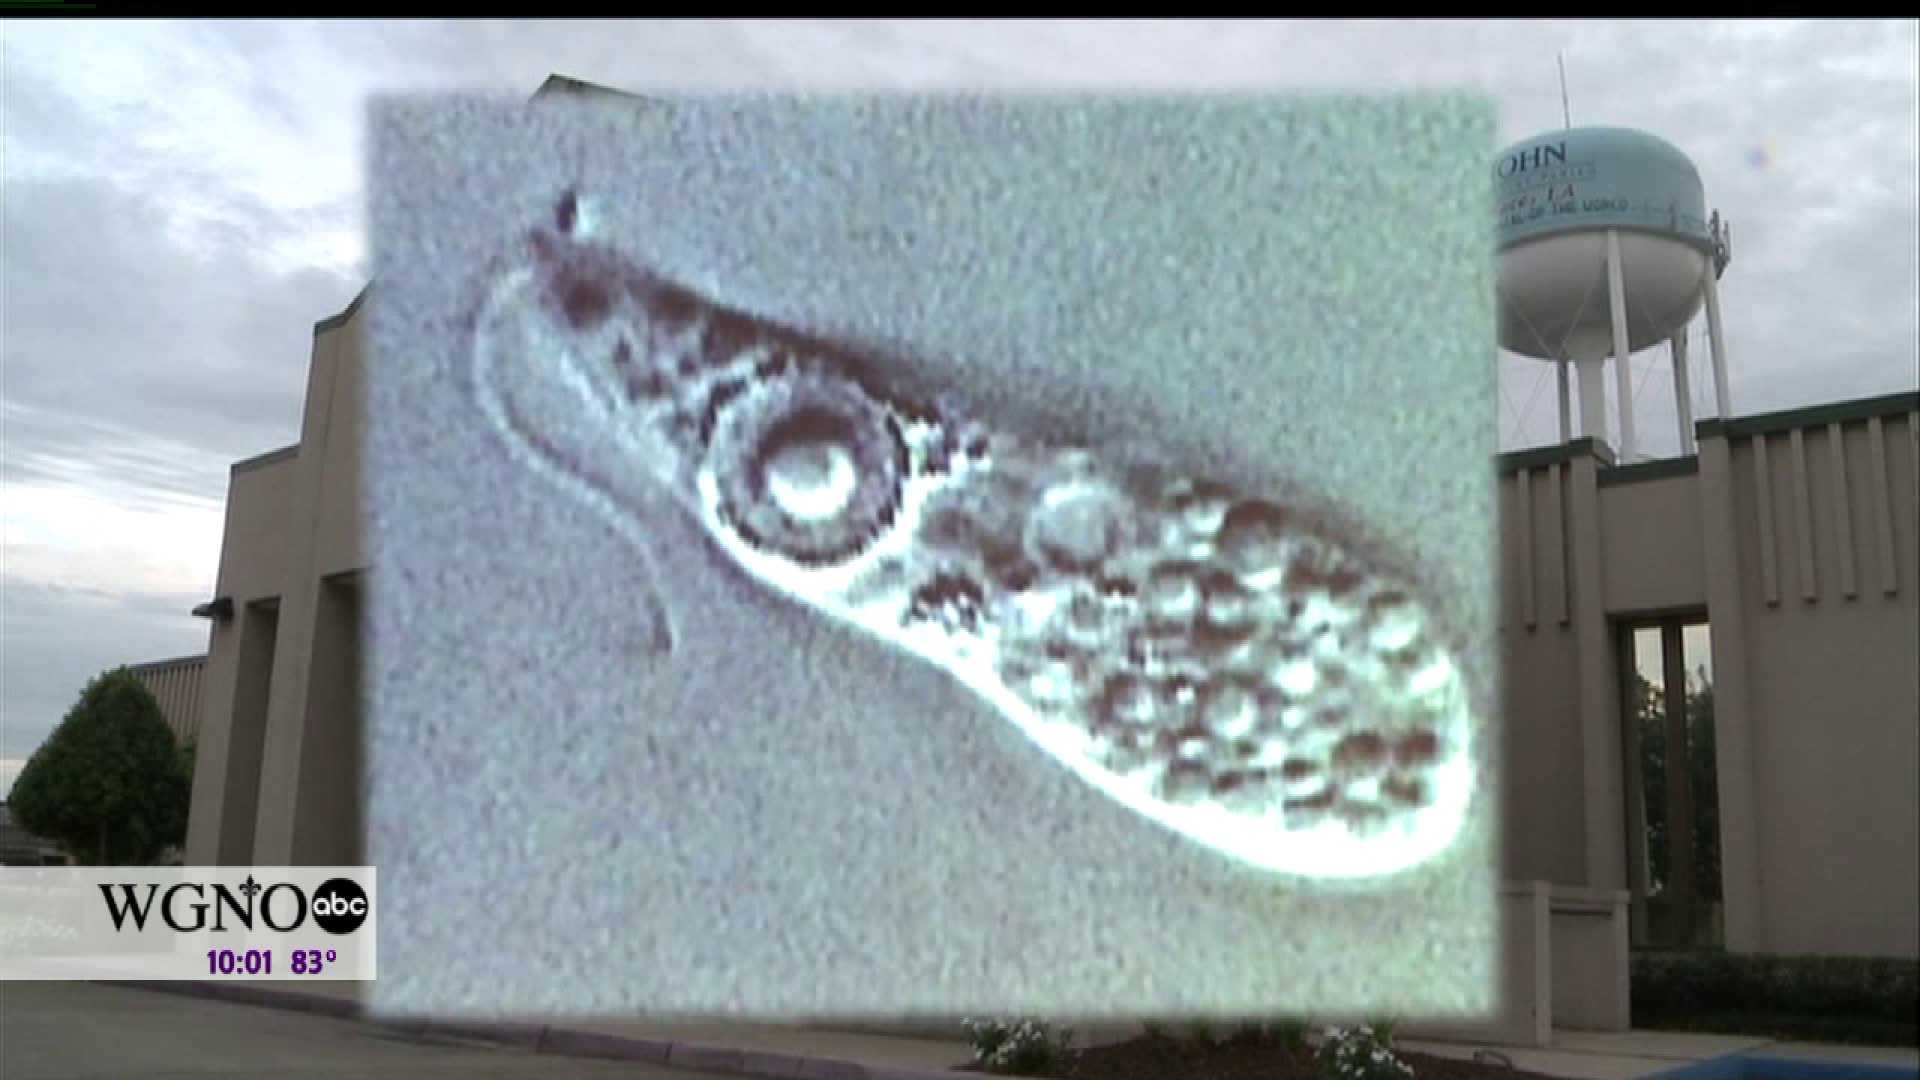 Deadly, braineating amoeba found in Louisiana water system AOL News